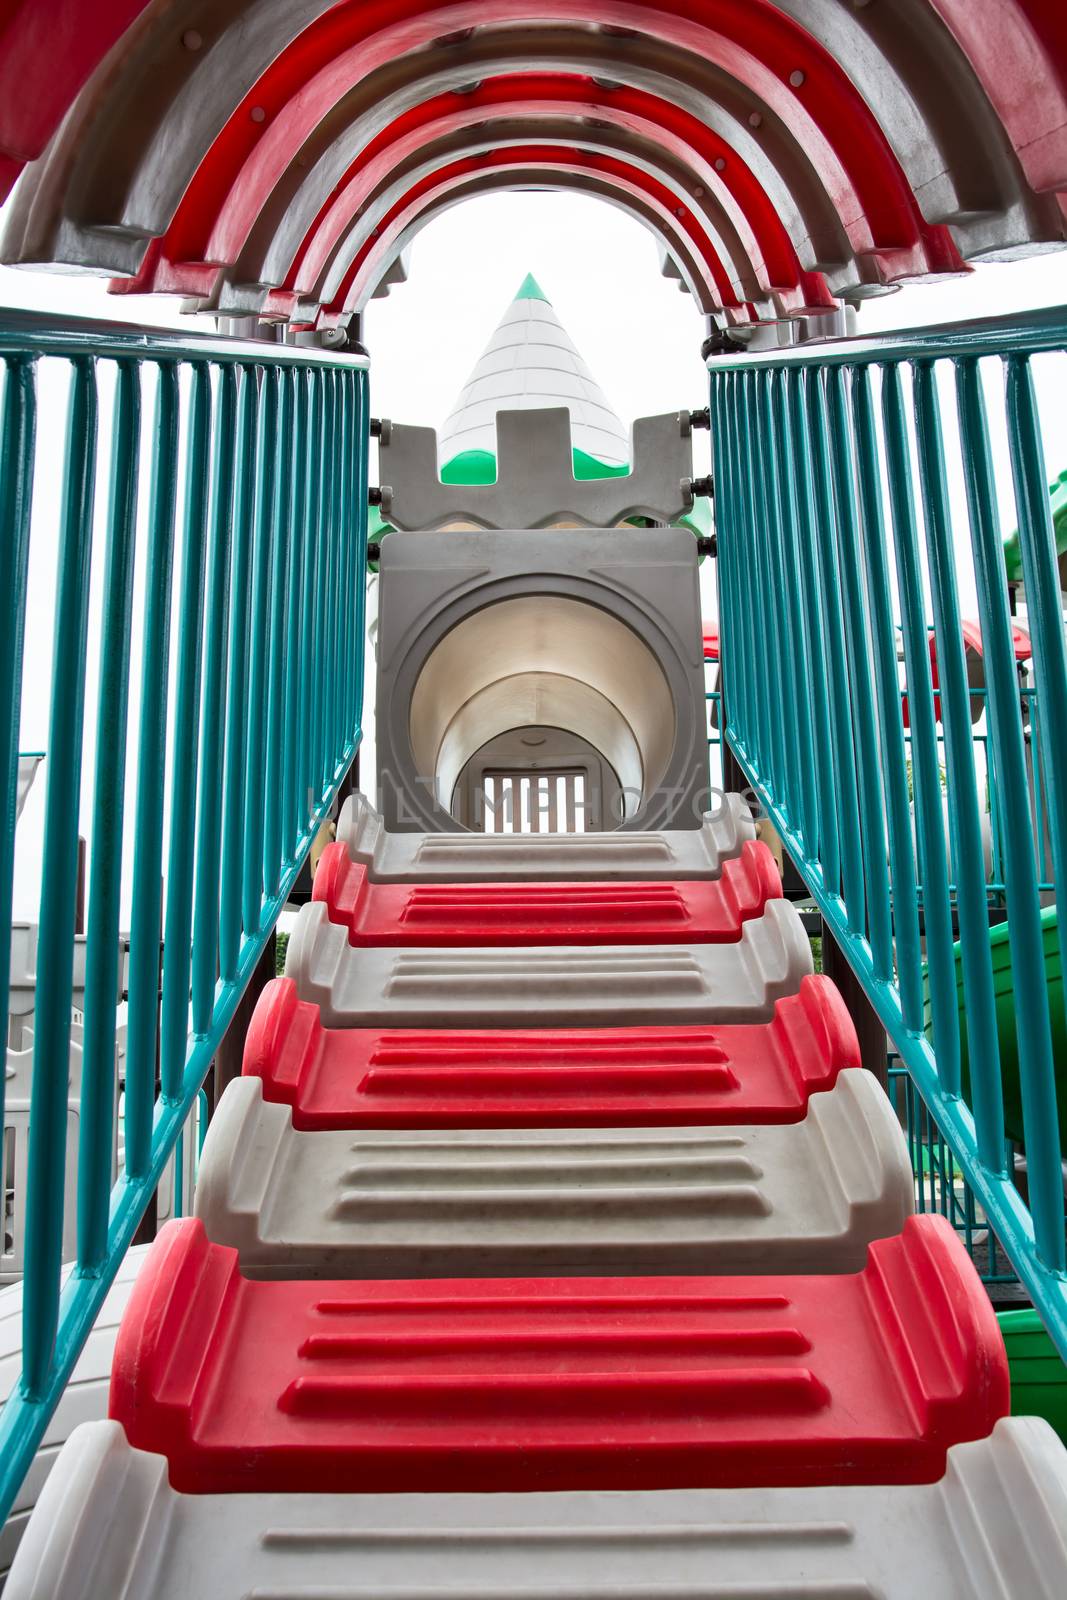 the playing in the red plastic tunnel slide at the fun park